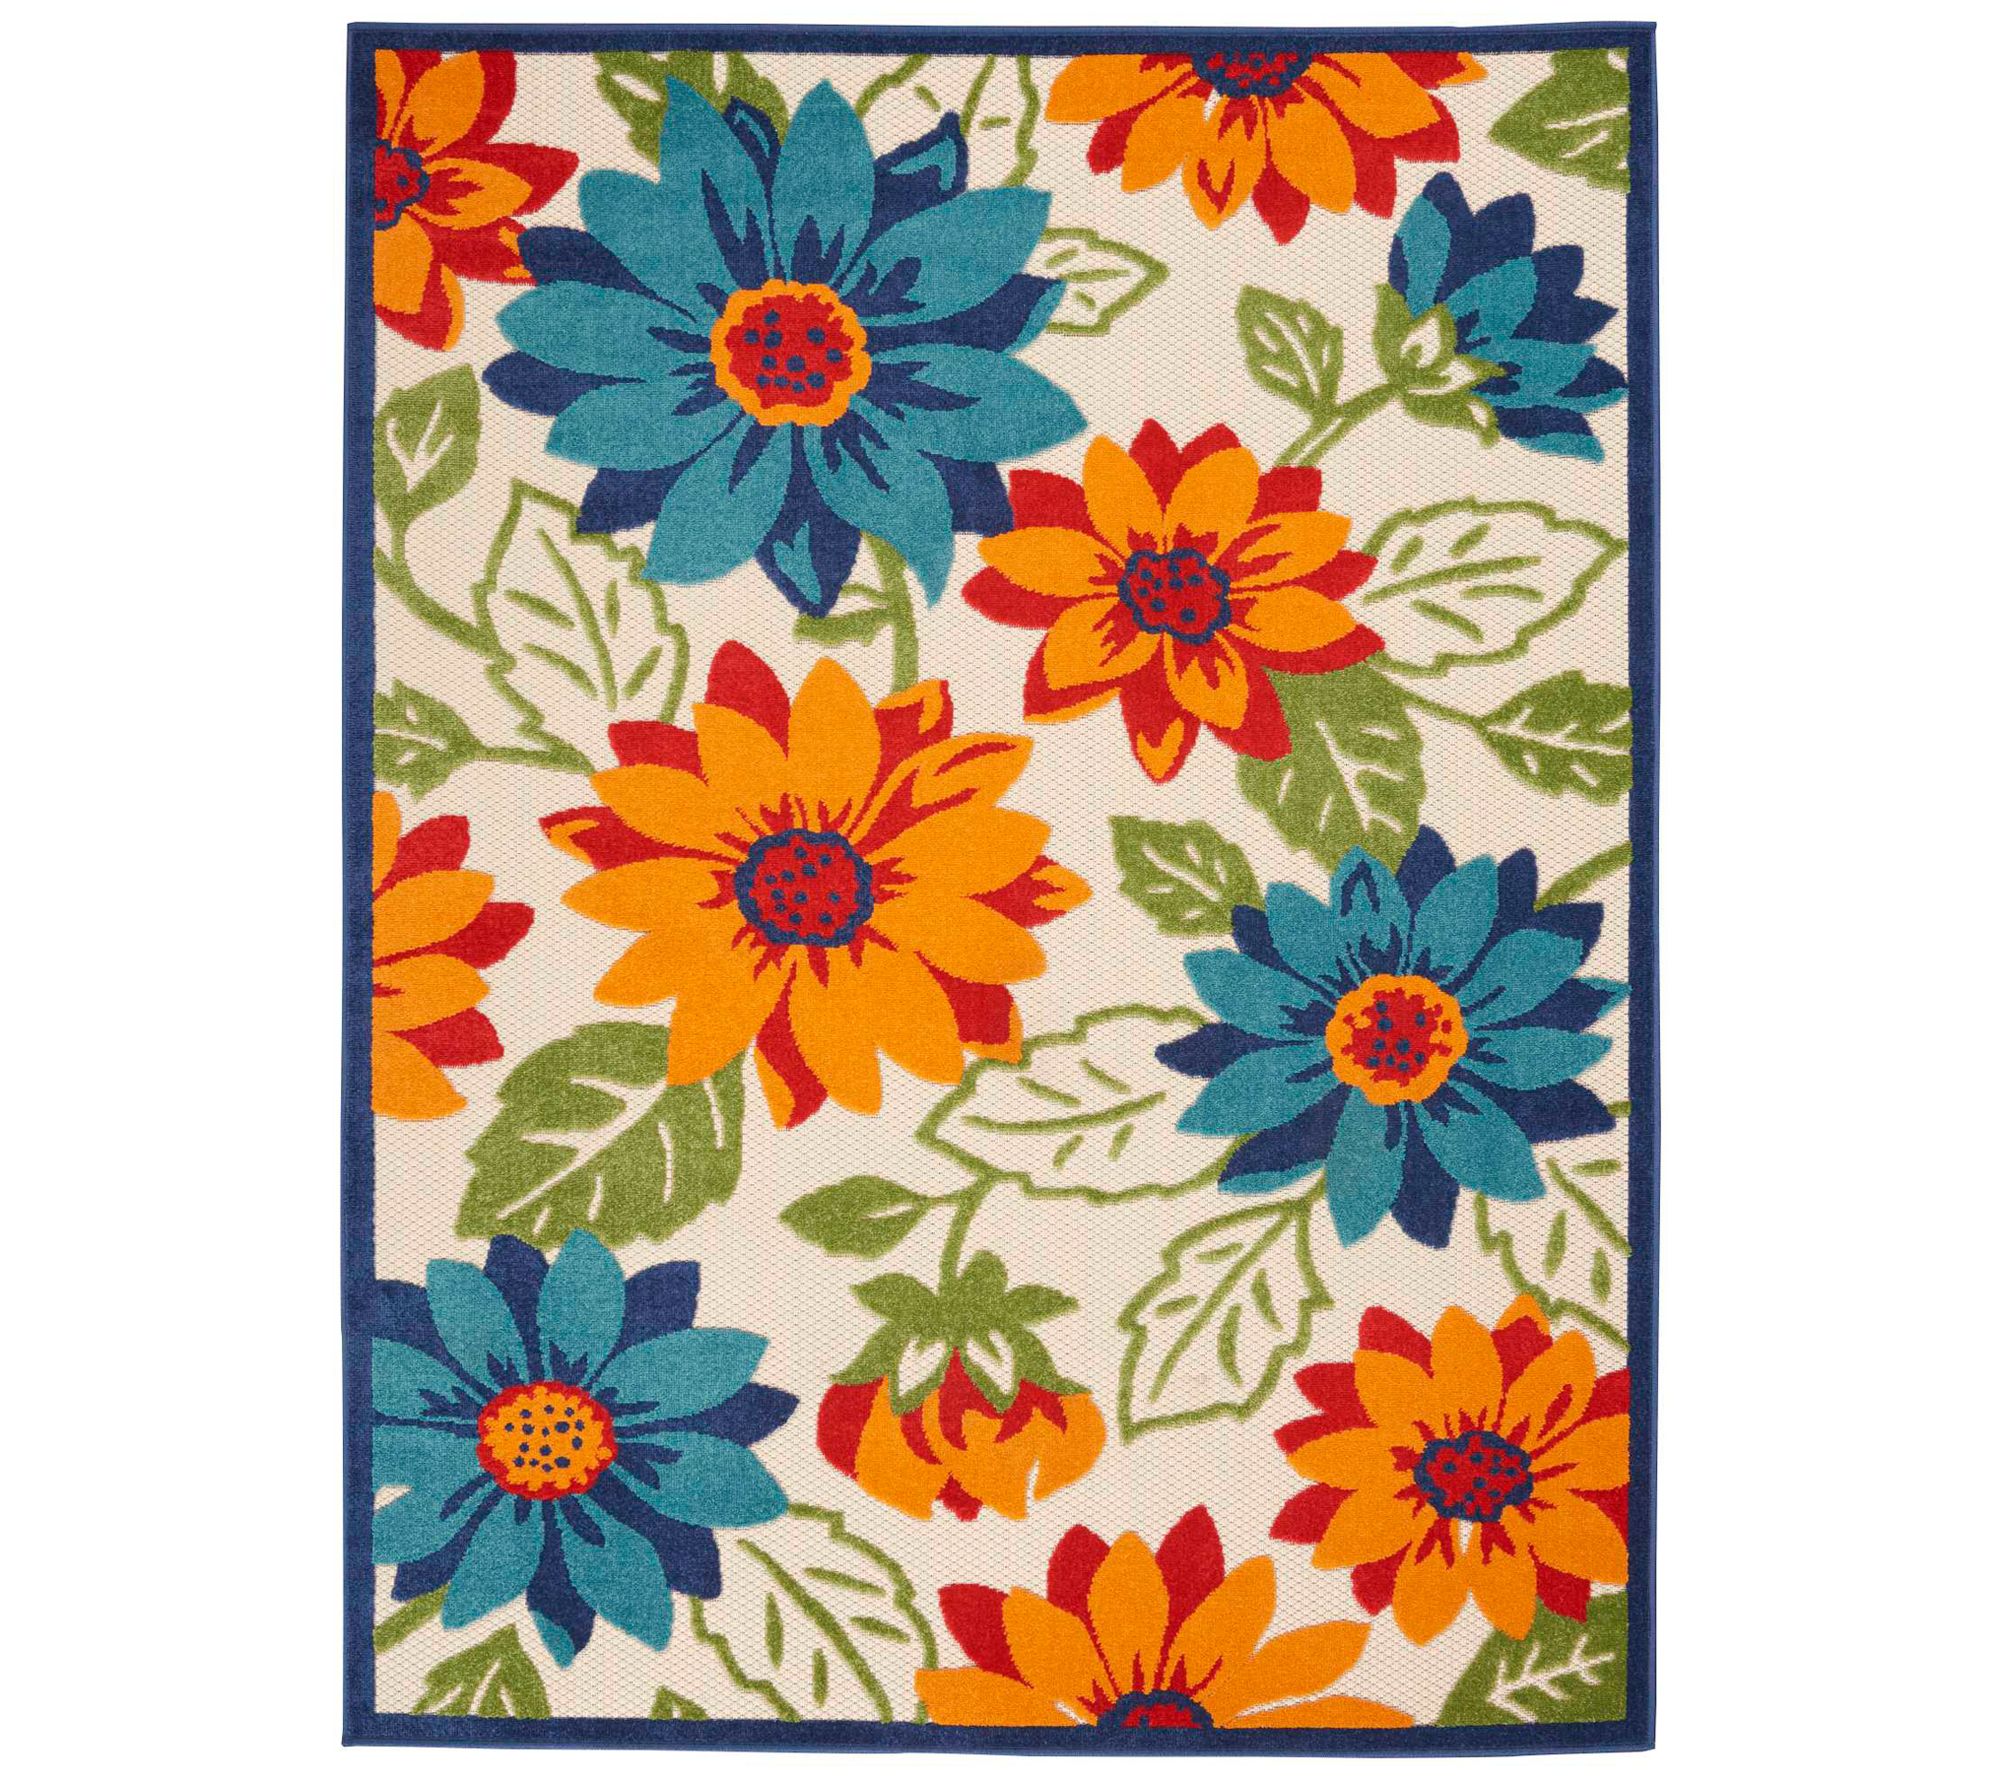 Outdoor Area Rug for Patio,Fall Watercolor Retro Floral White Camping Rugs  Indoor Large Floor Mat 5x8ft,Pastoral Vintage Flower Seamless Outside